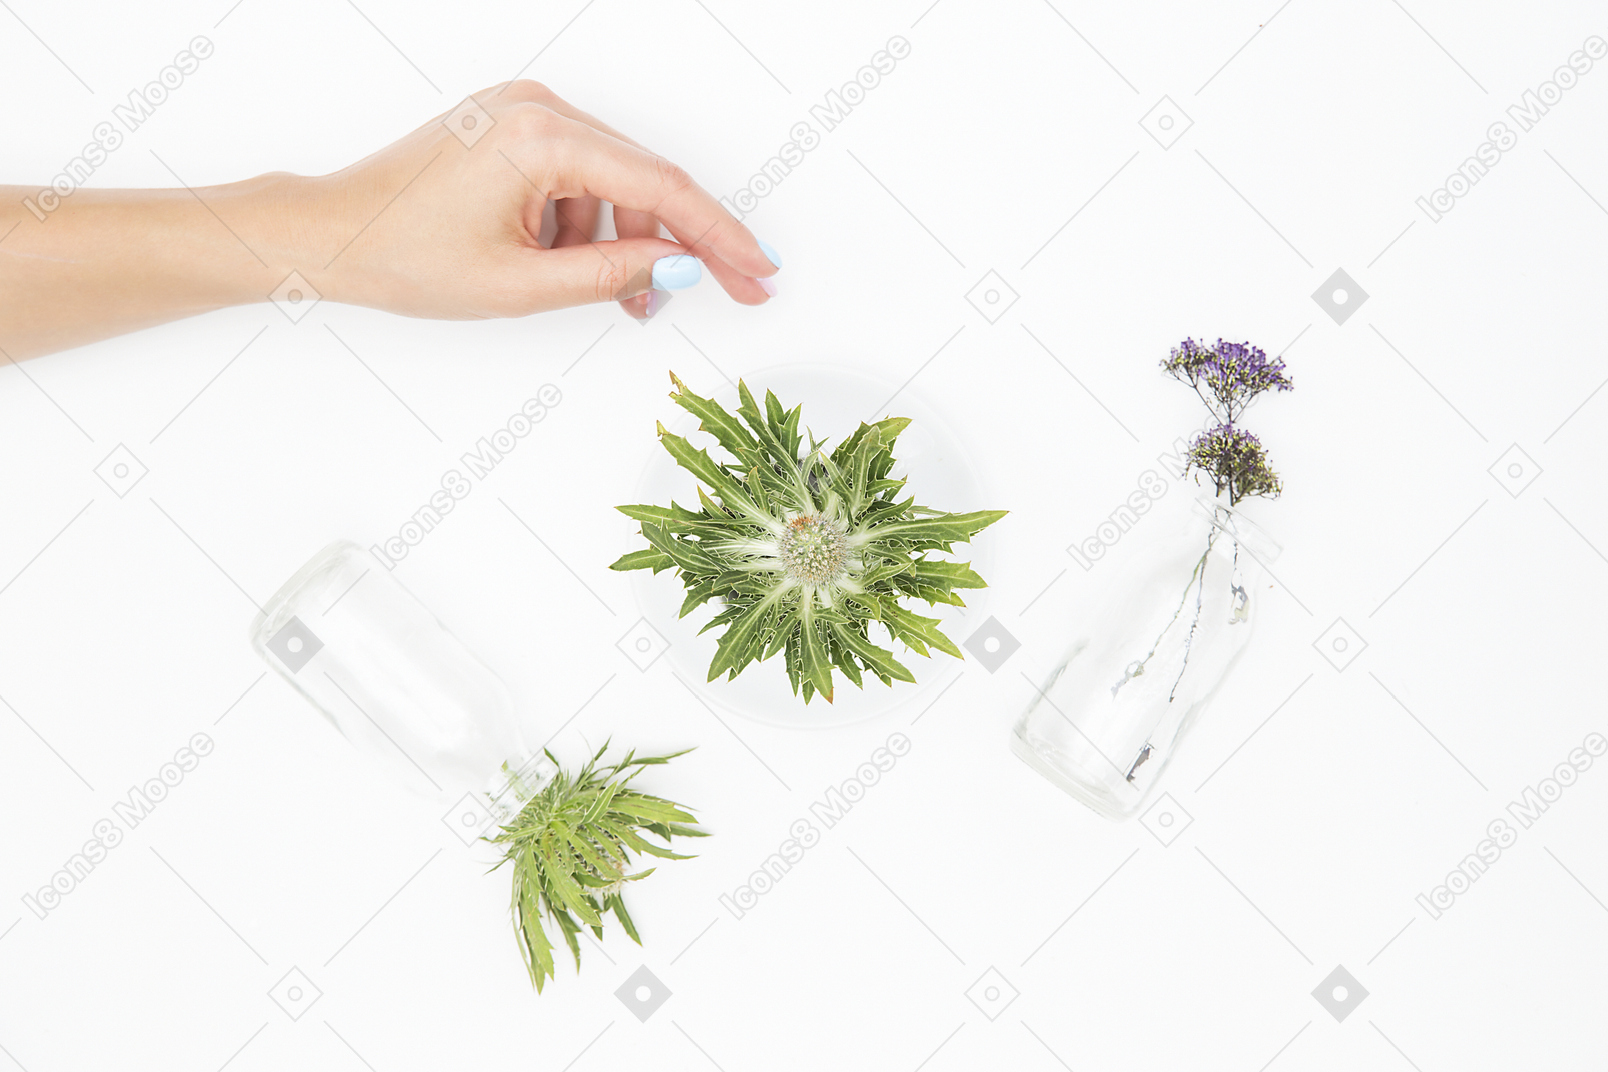 Female hand next to the different glass objects and green plants